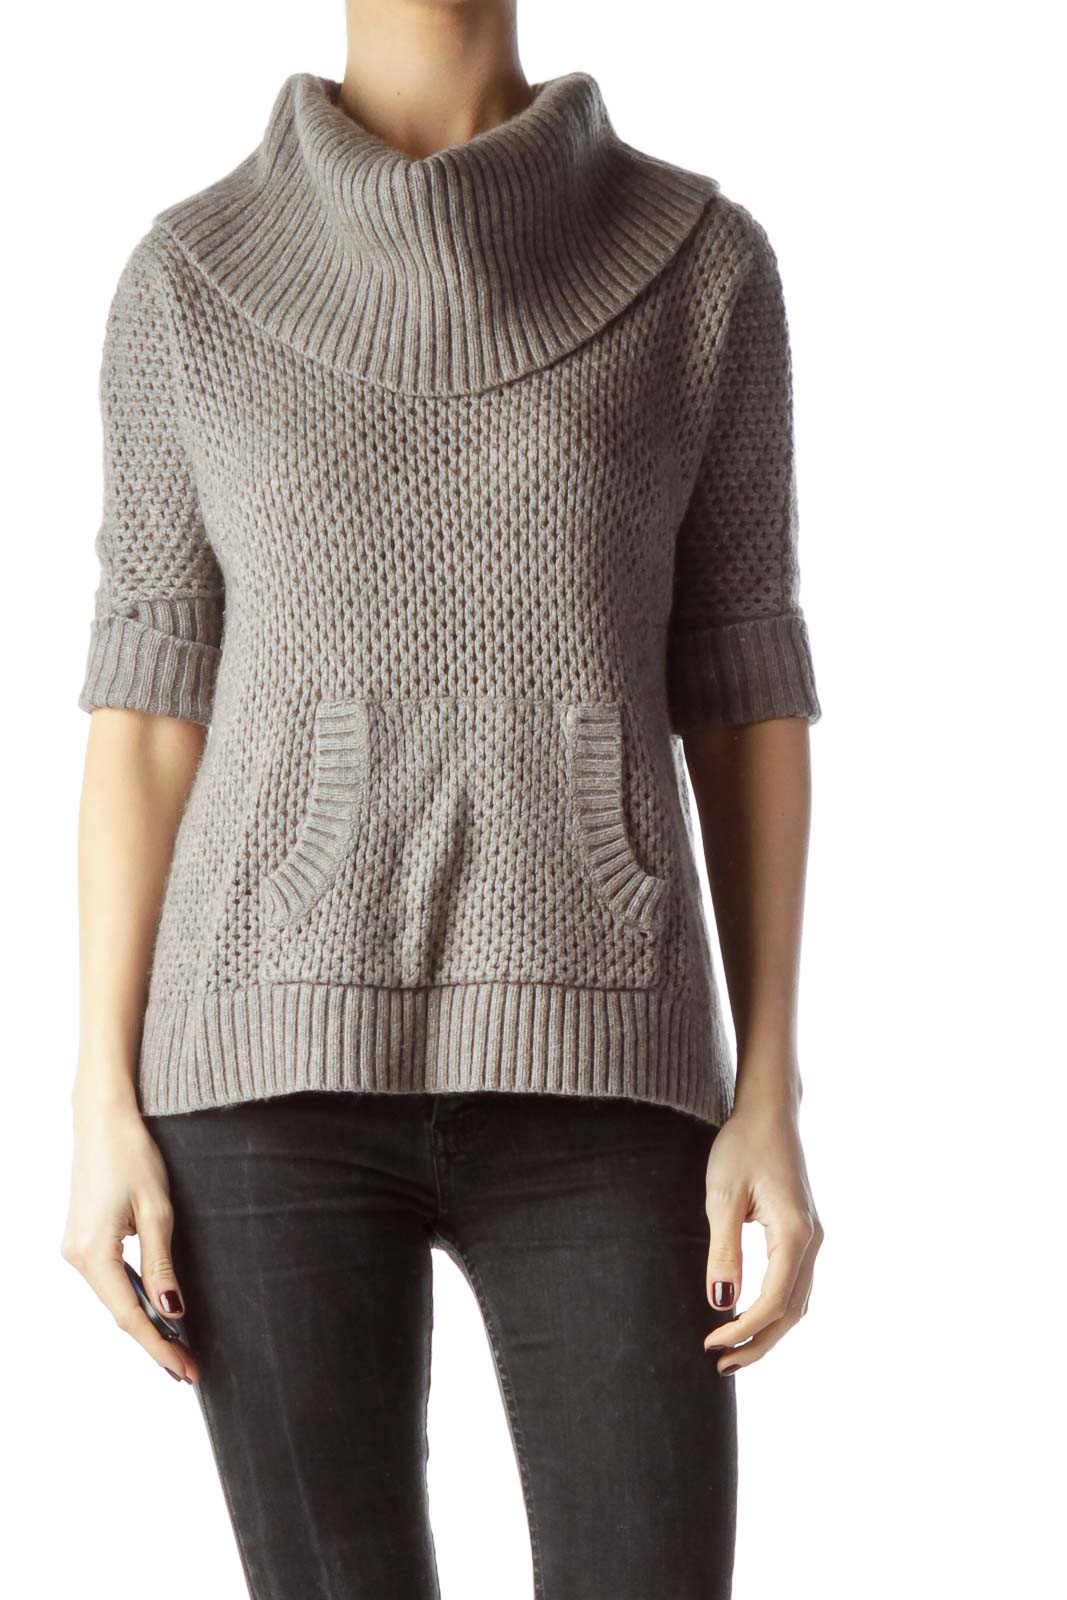 Gray Front Pocket Cowl Neck Knit Top Front